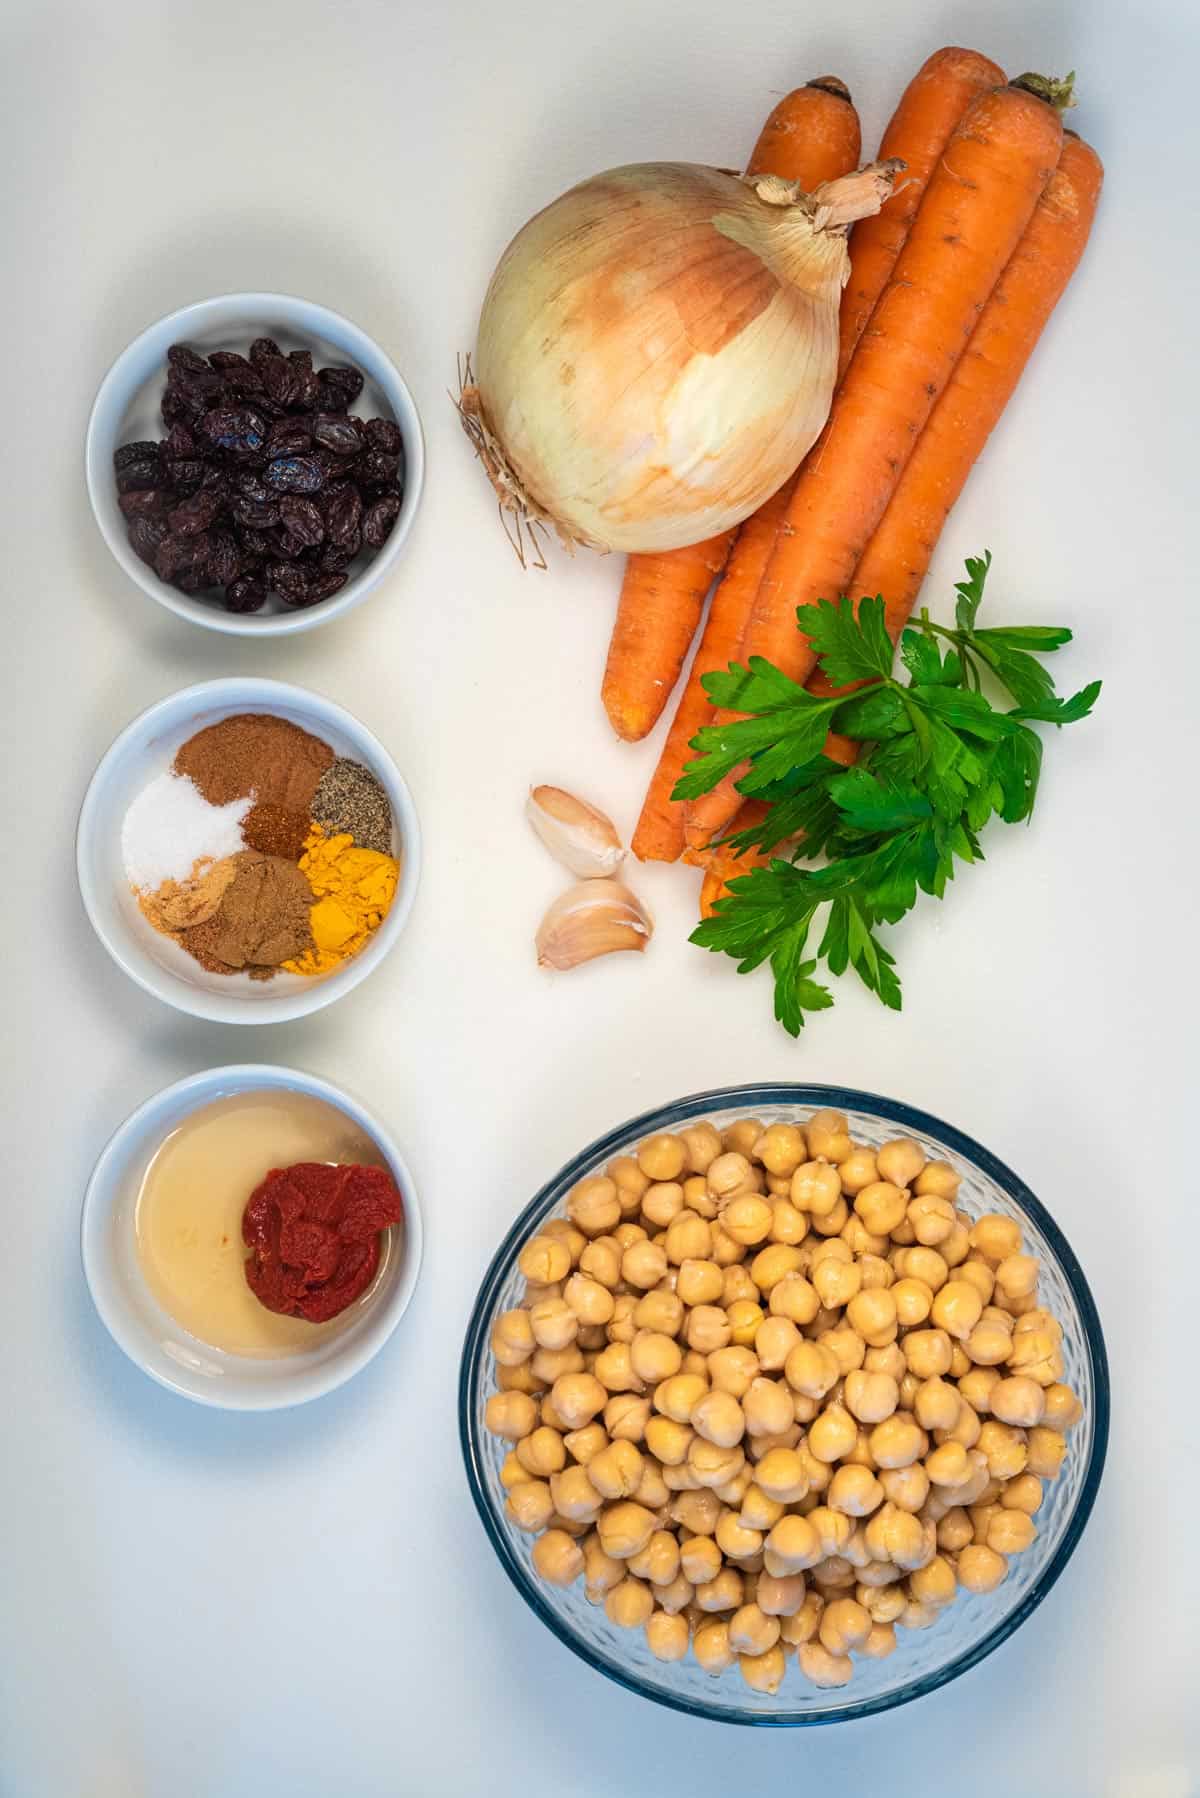 Ingredients for a Moroccan vegan chickpea tagine recipe